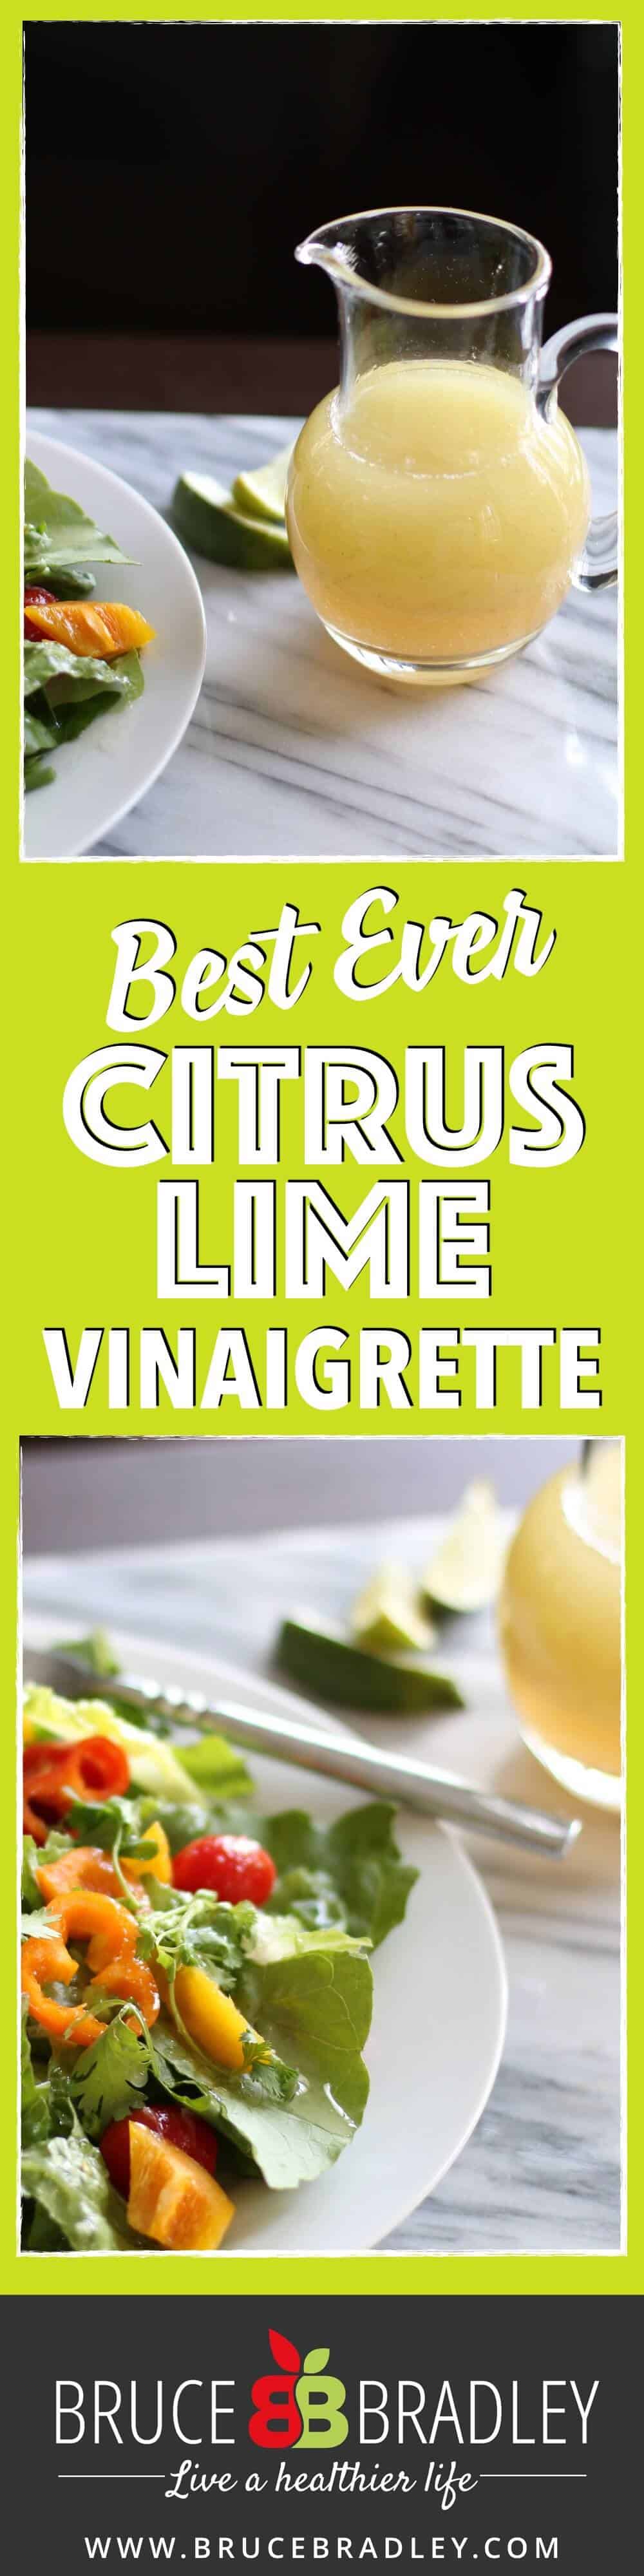 This Best Ever Citrus Lime Vinaigrette Packs A Whole Lot Of Flavor And Is A Simple Way To Spice Up Your Salad!